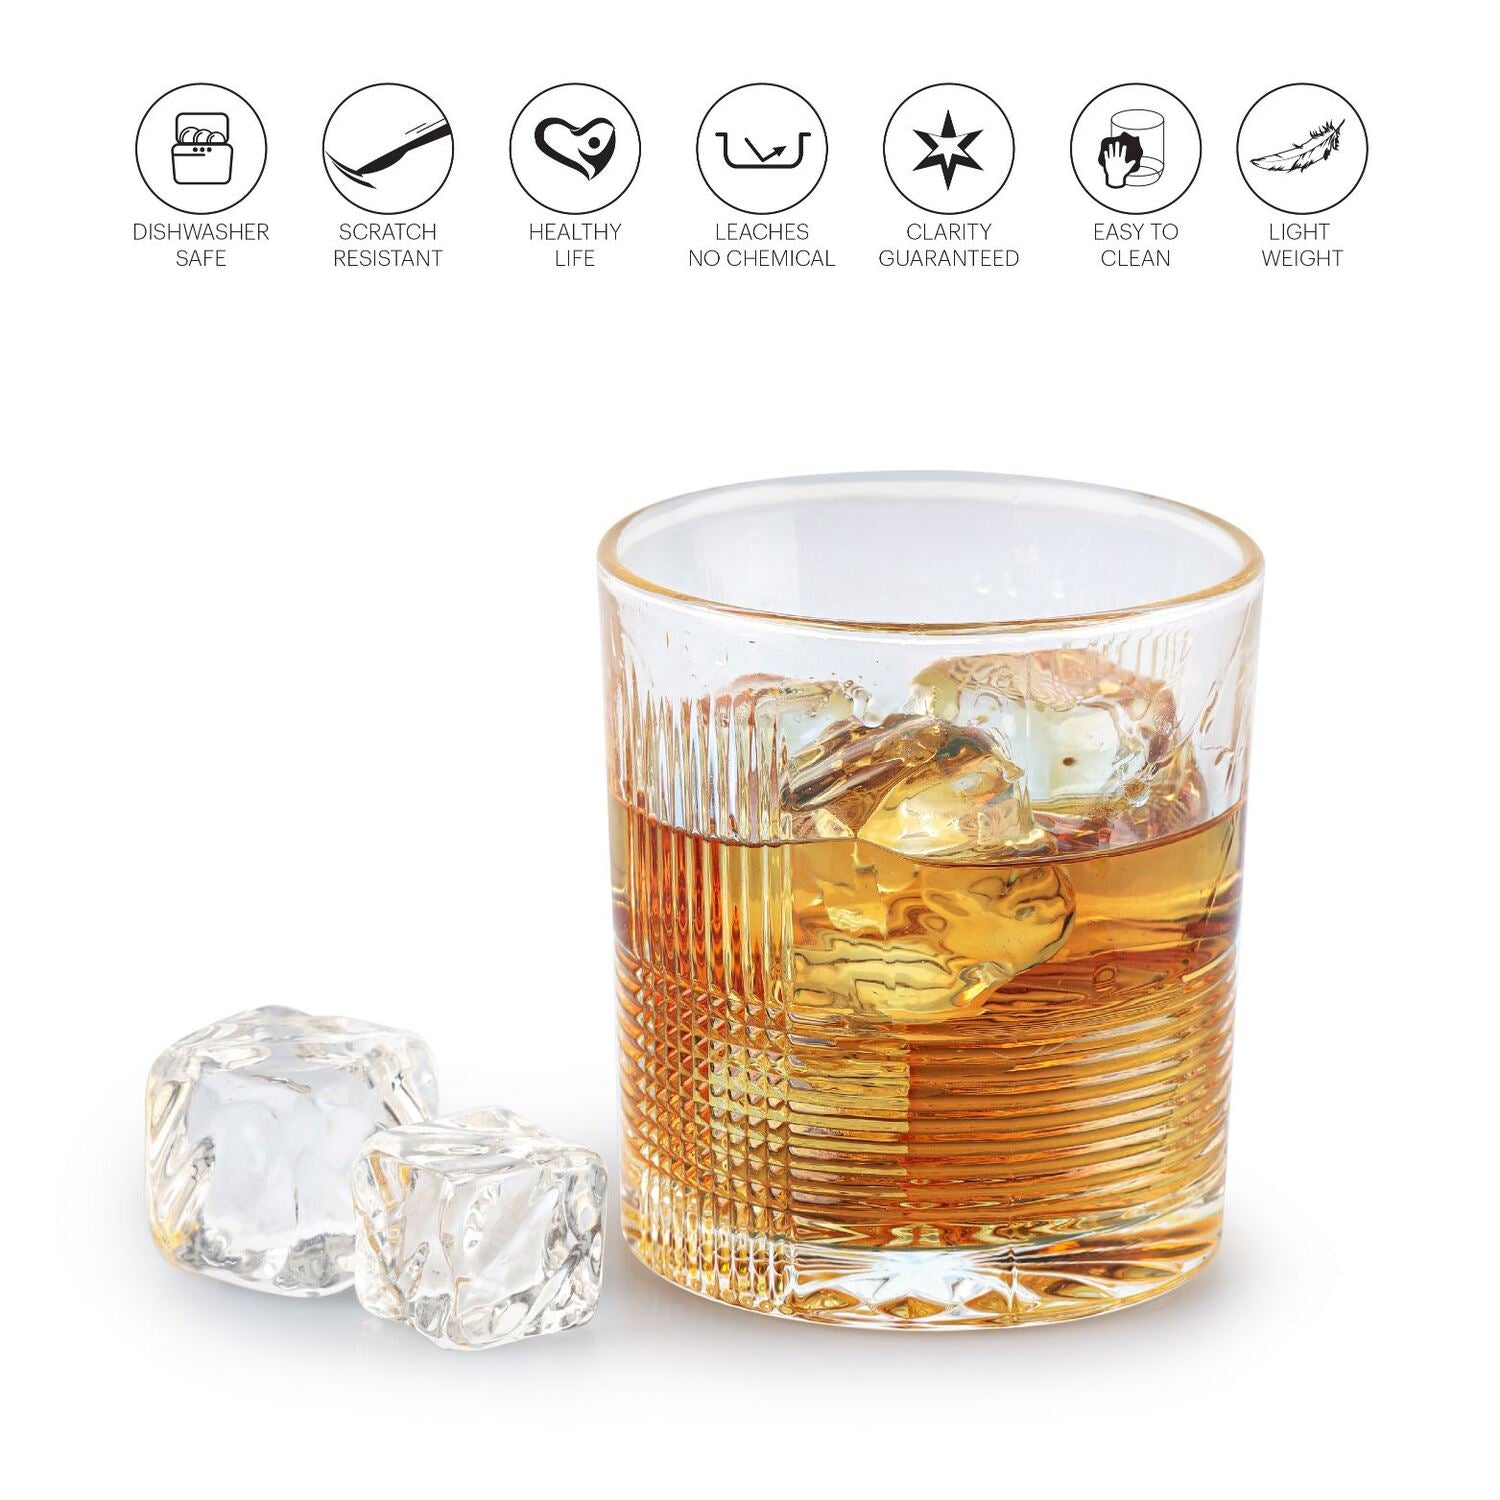 Enigma Glass Tumblers, Set of 6 Clear / 215ml / 6 Piece